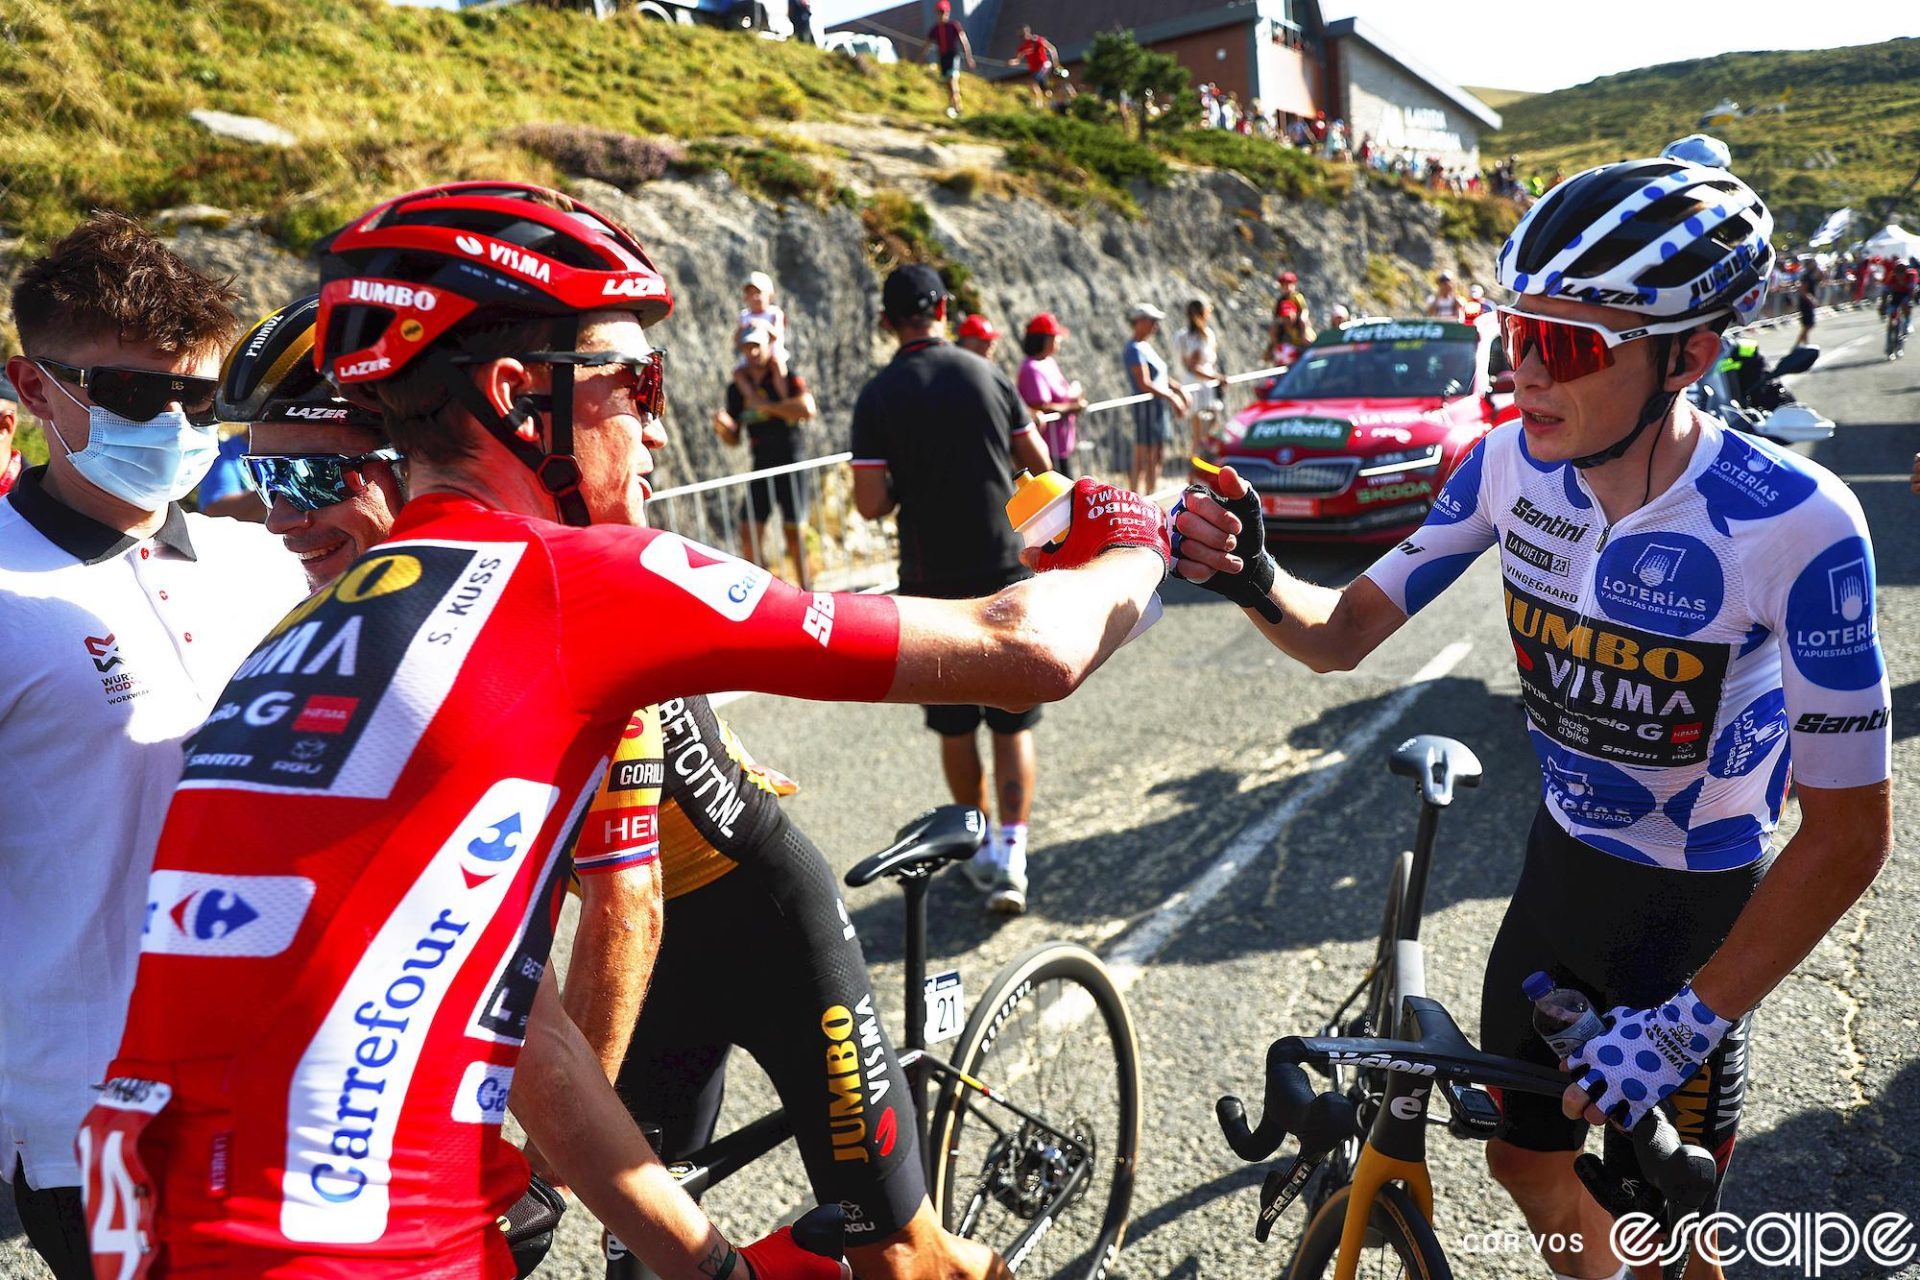 Sepp Kuss exchanges a fist-bump with Jonas Vingegaard after stage 14 of the 2023 Vuelta a España. Kuss is in the red jersey of race leader, while Vingegaard is in the white with blue polka dots of best climber. Kuss is smiling, while Vingegaard has a slightly more neutral expression.